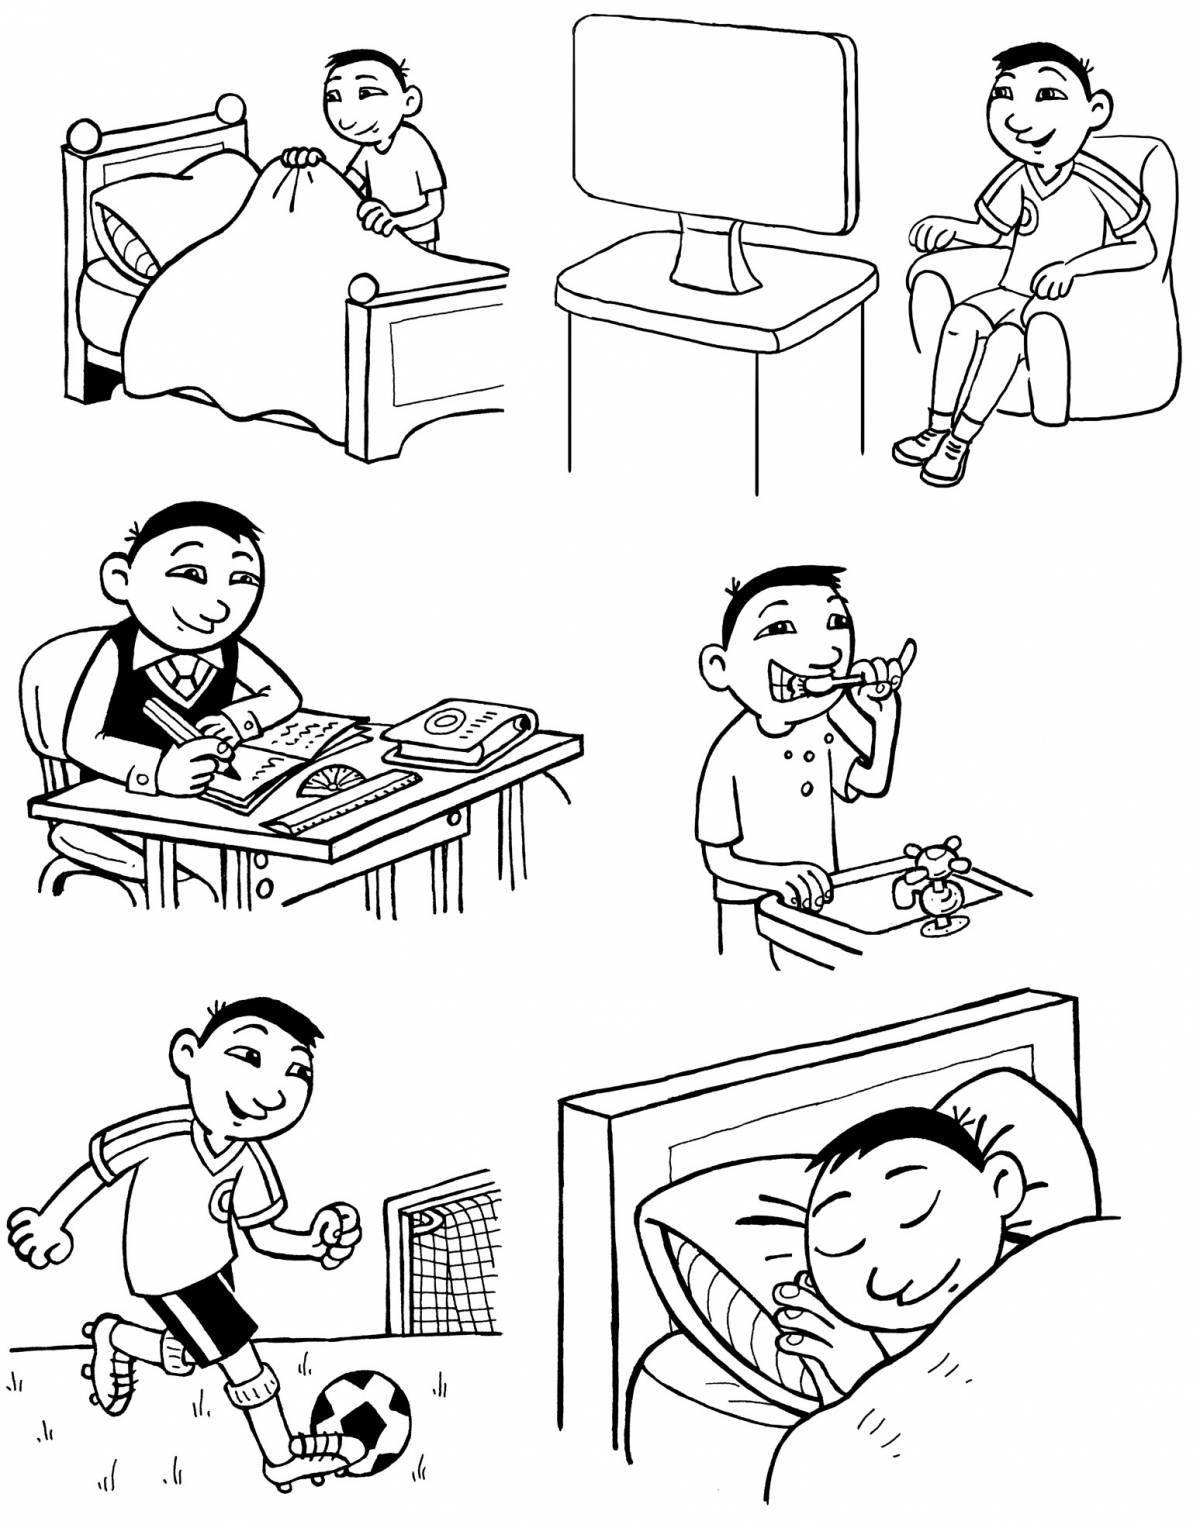 A funny daily routine for an elementary school student